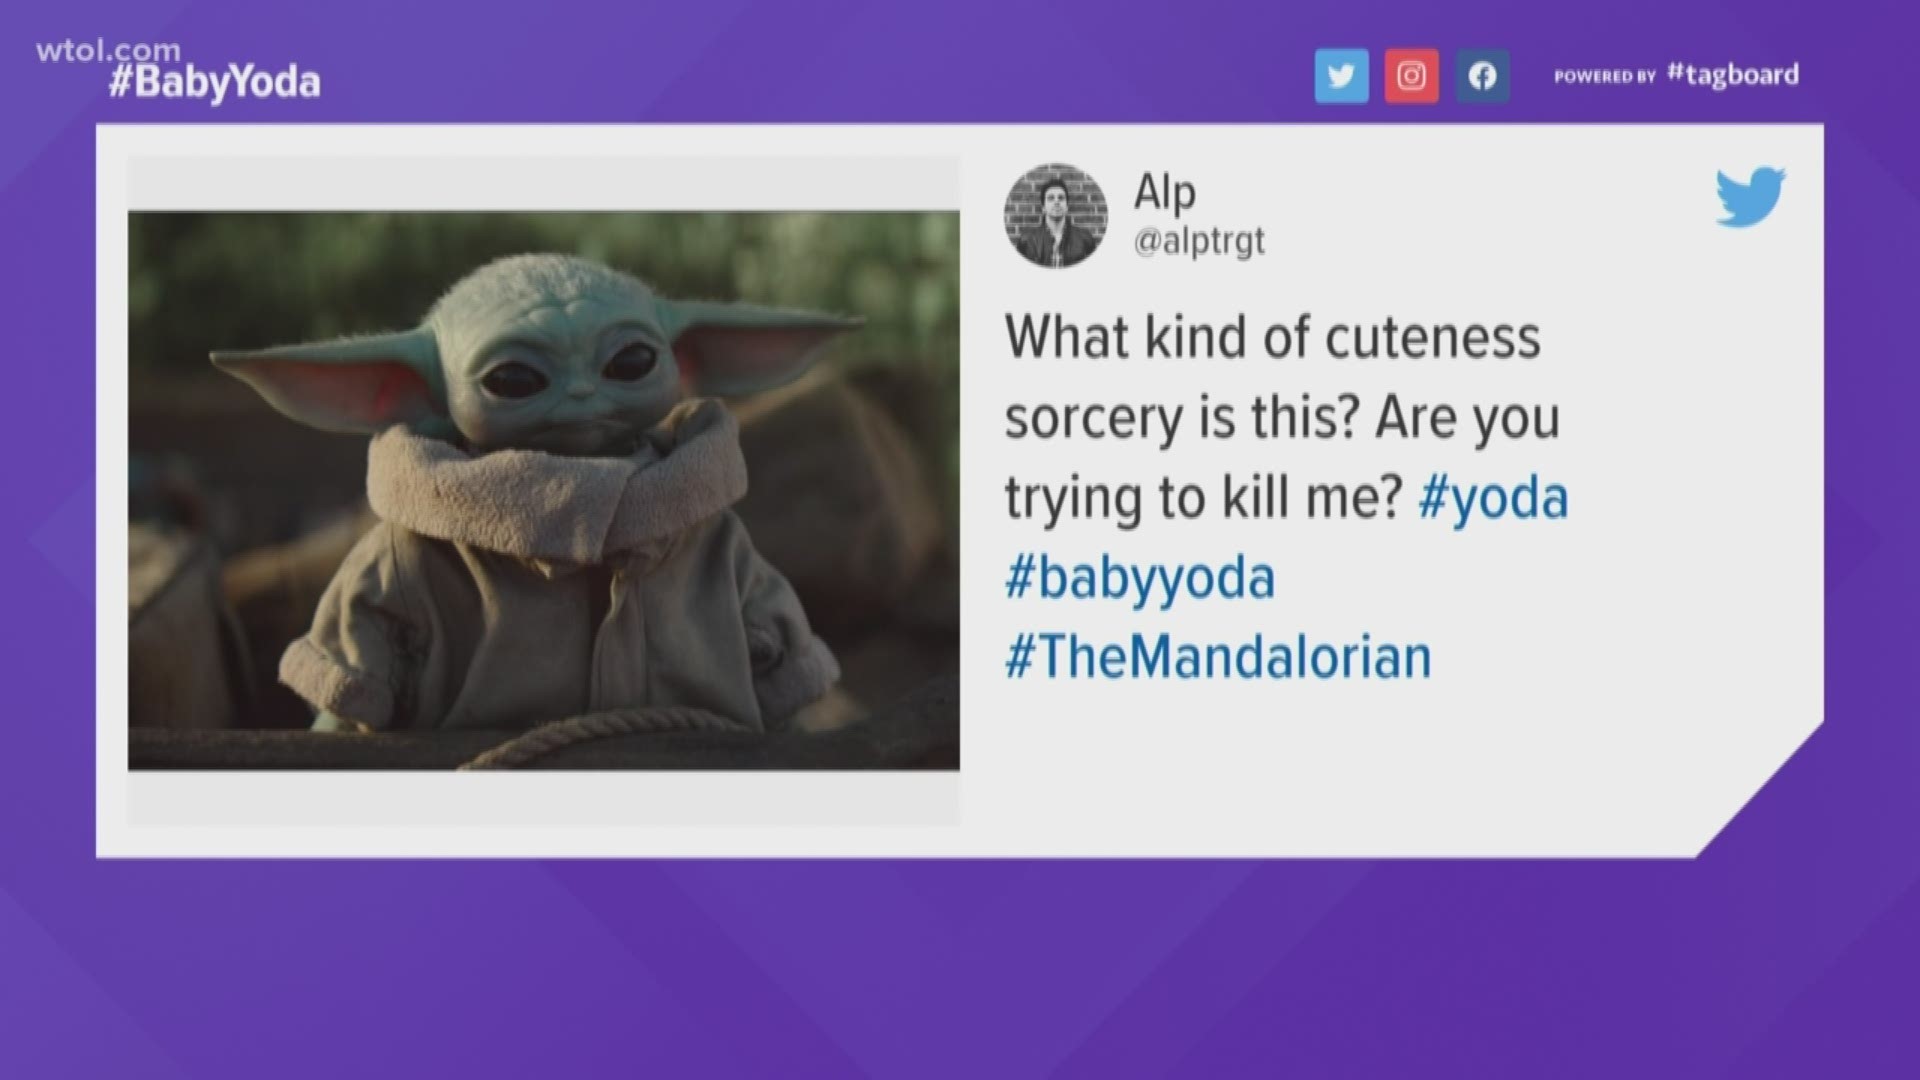 Since the premiere of 'The Mandalorian' on Disney+, fans have gone nuts over the adorable fictional character.